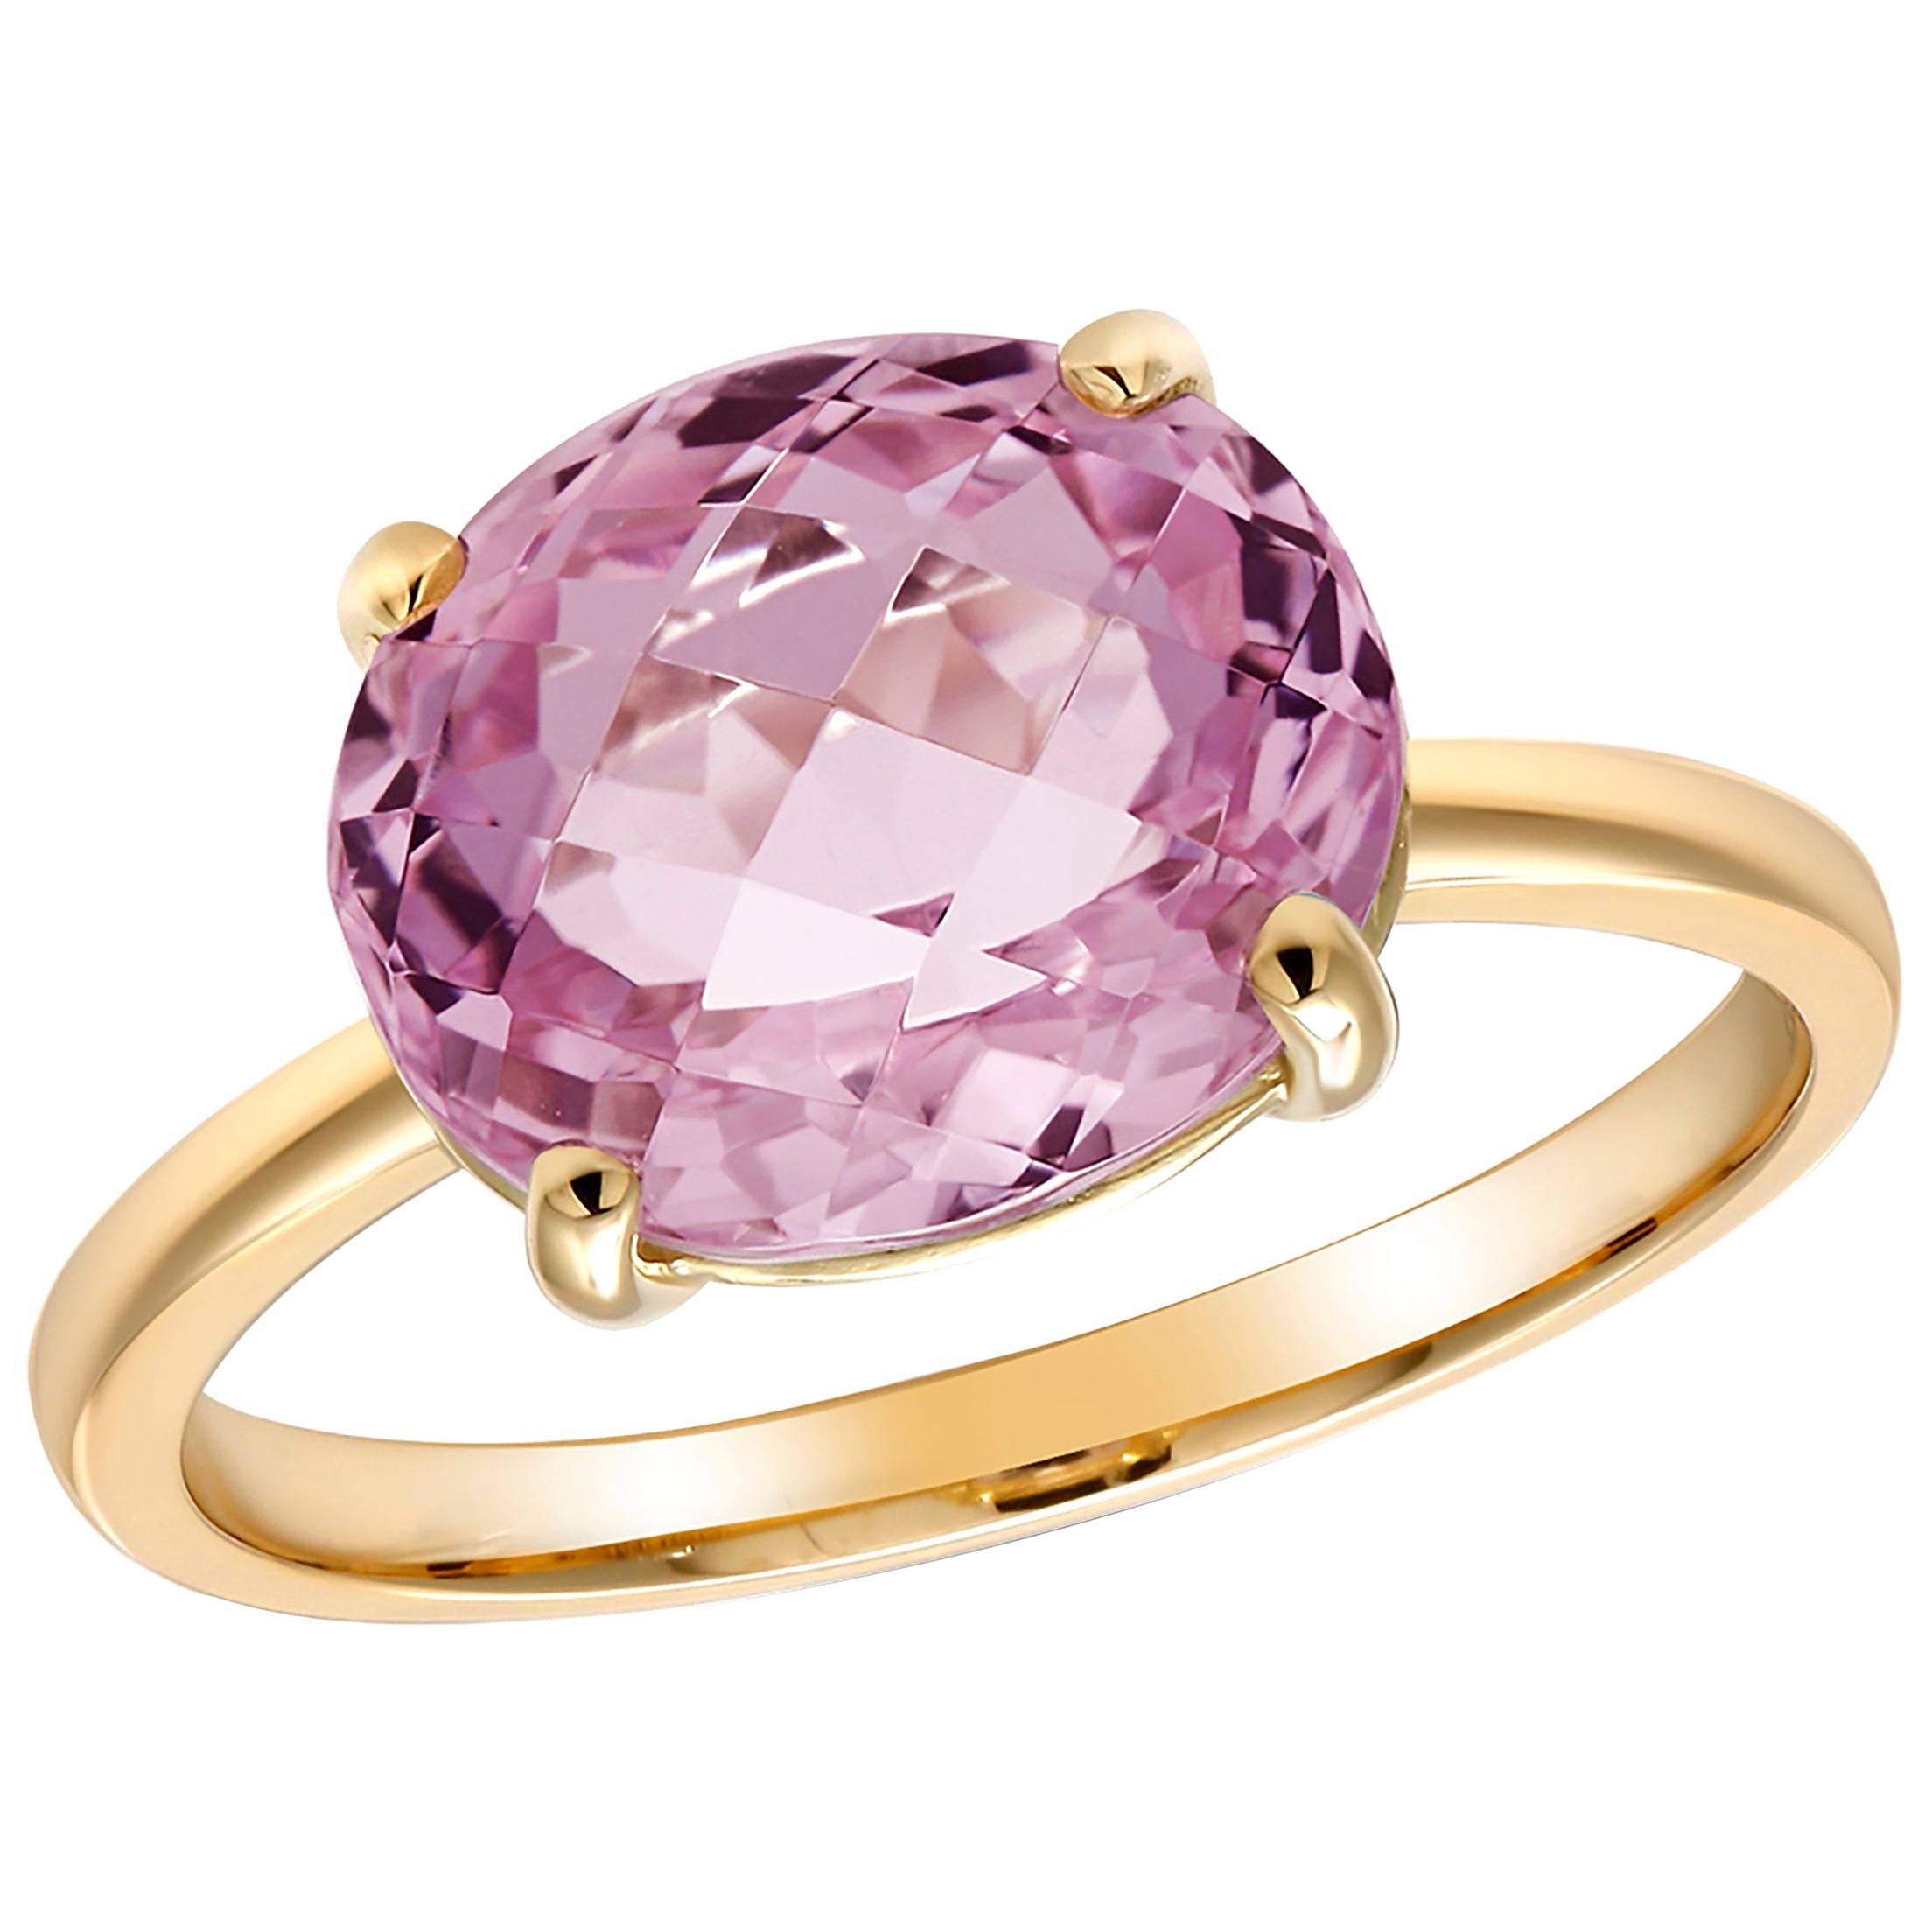 Eighteen karat yellow gold cocktail ring
Kunzite weighing 3.79 carat                                                                       
Ring size 6 In Stock
Ring can be resized 
New Ring
Handmade in USA
One of a kind ring 
Our design team select